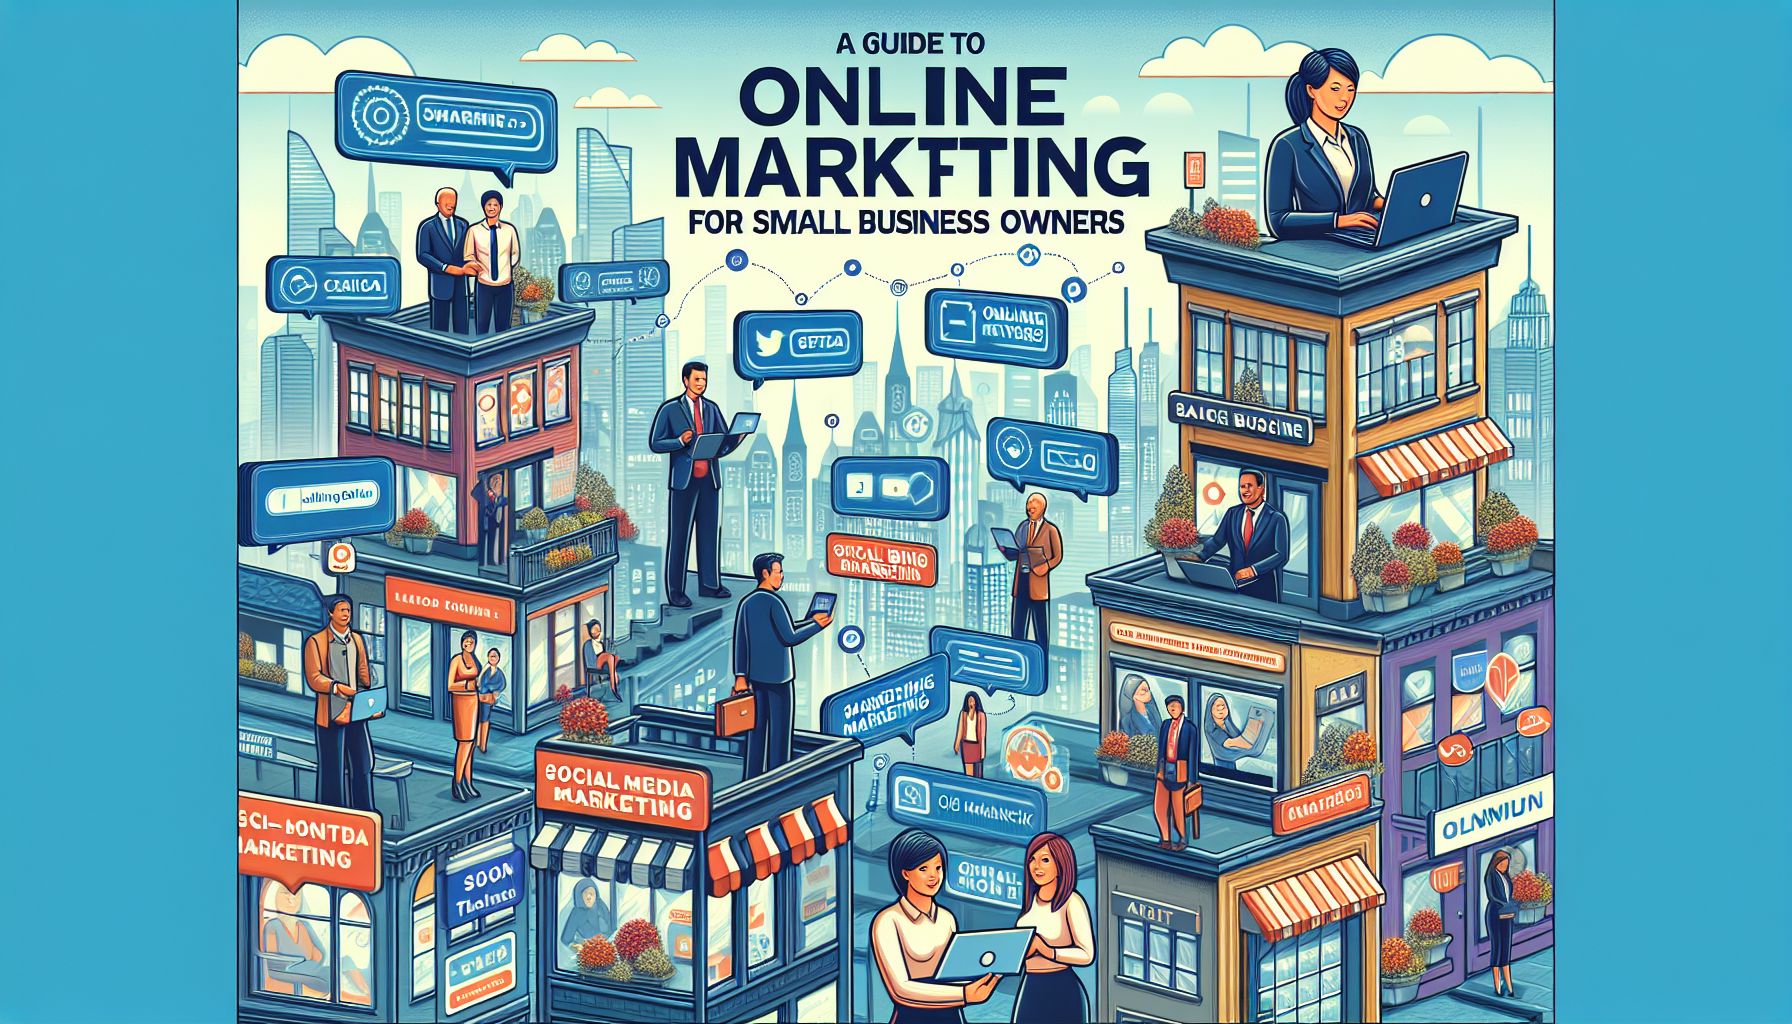 A Guide to Online Marketing for Small Business Owners